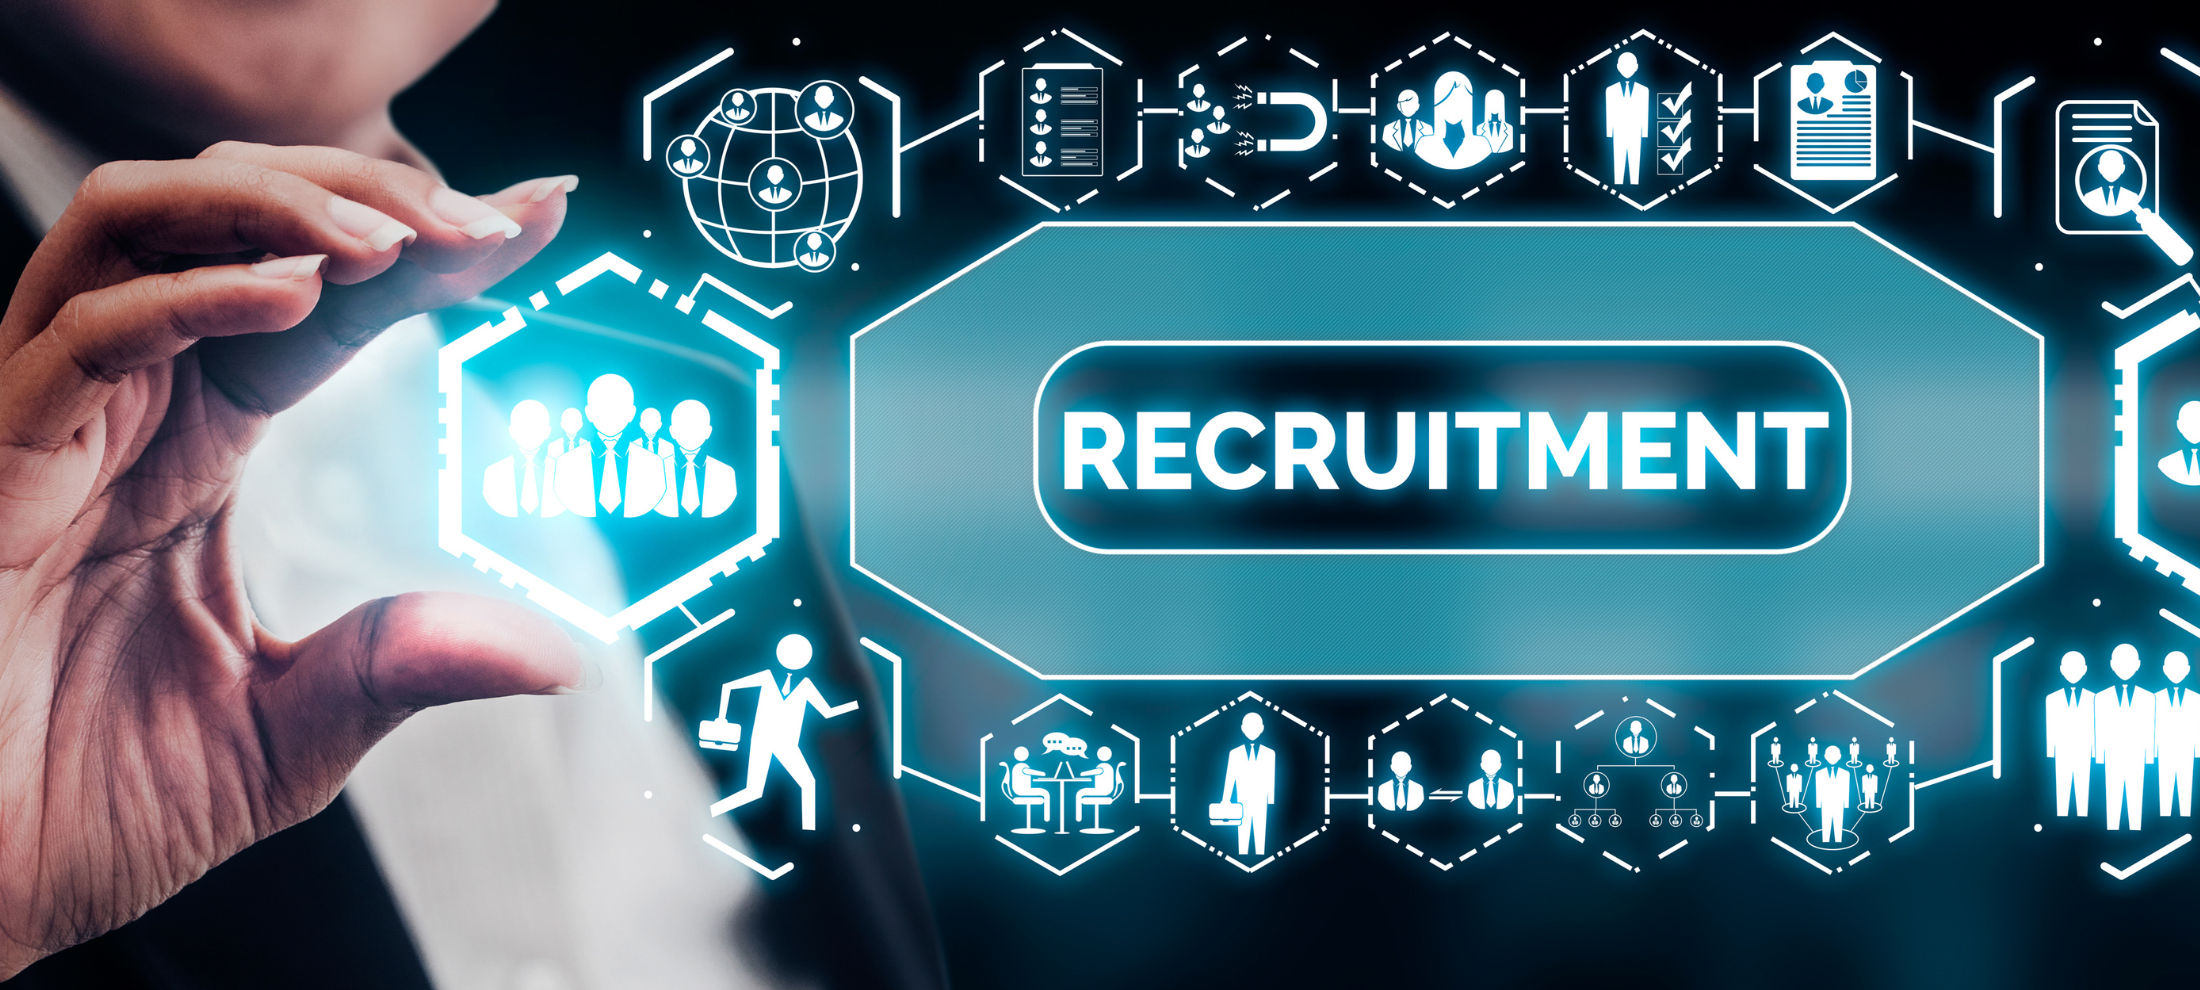 A recruiter using recruiting tools hire at scale